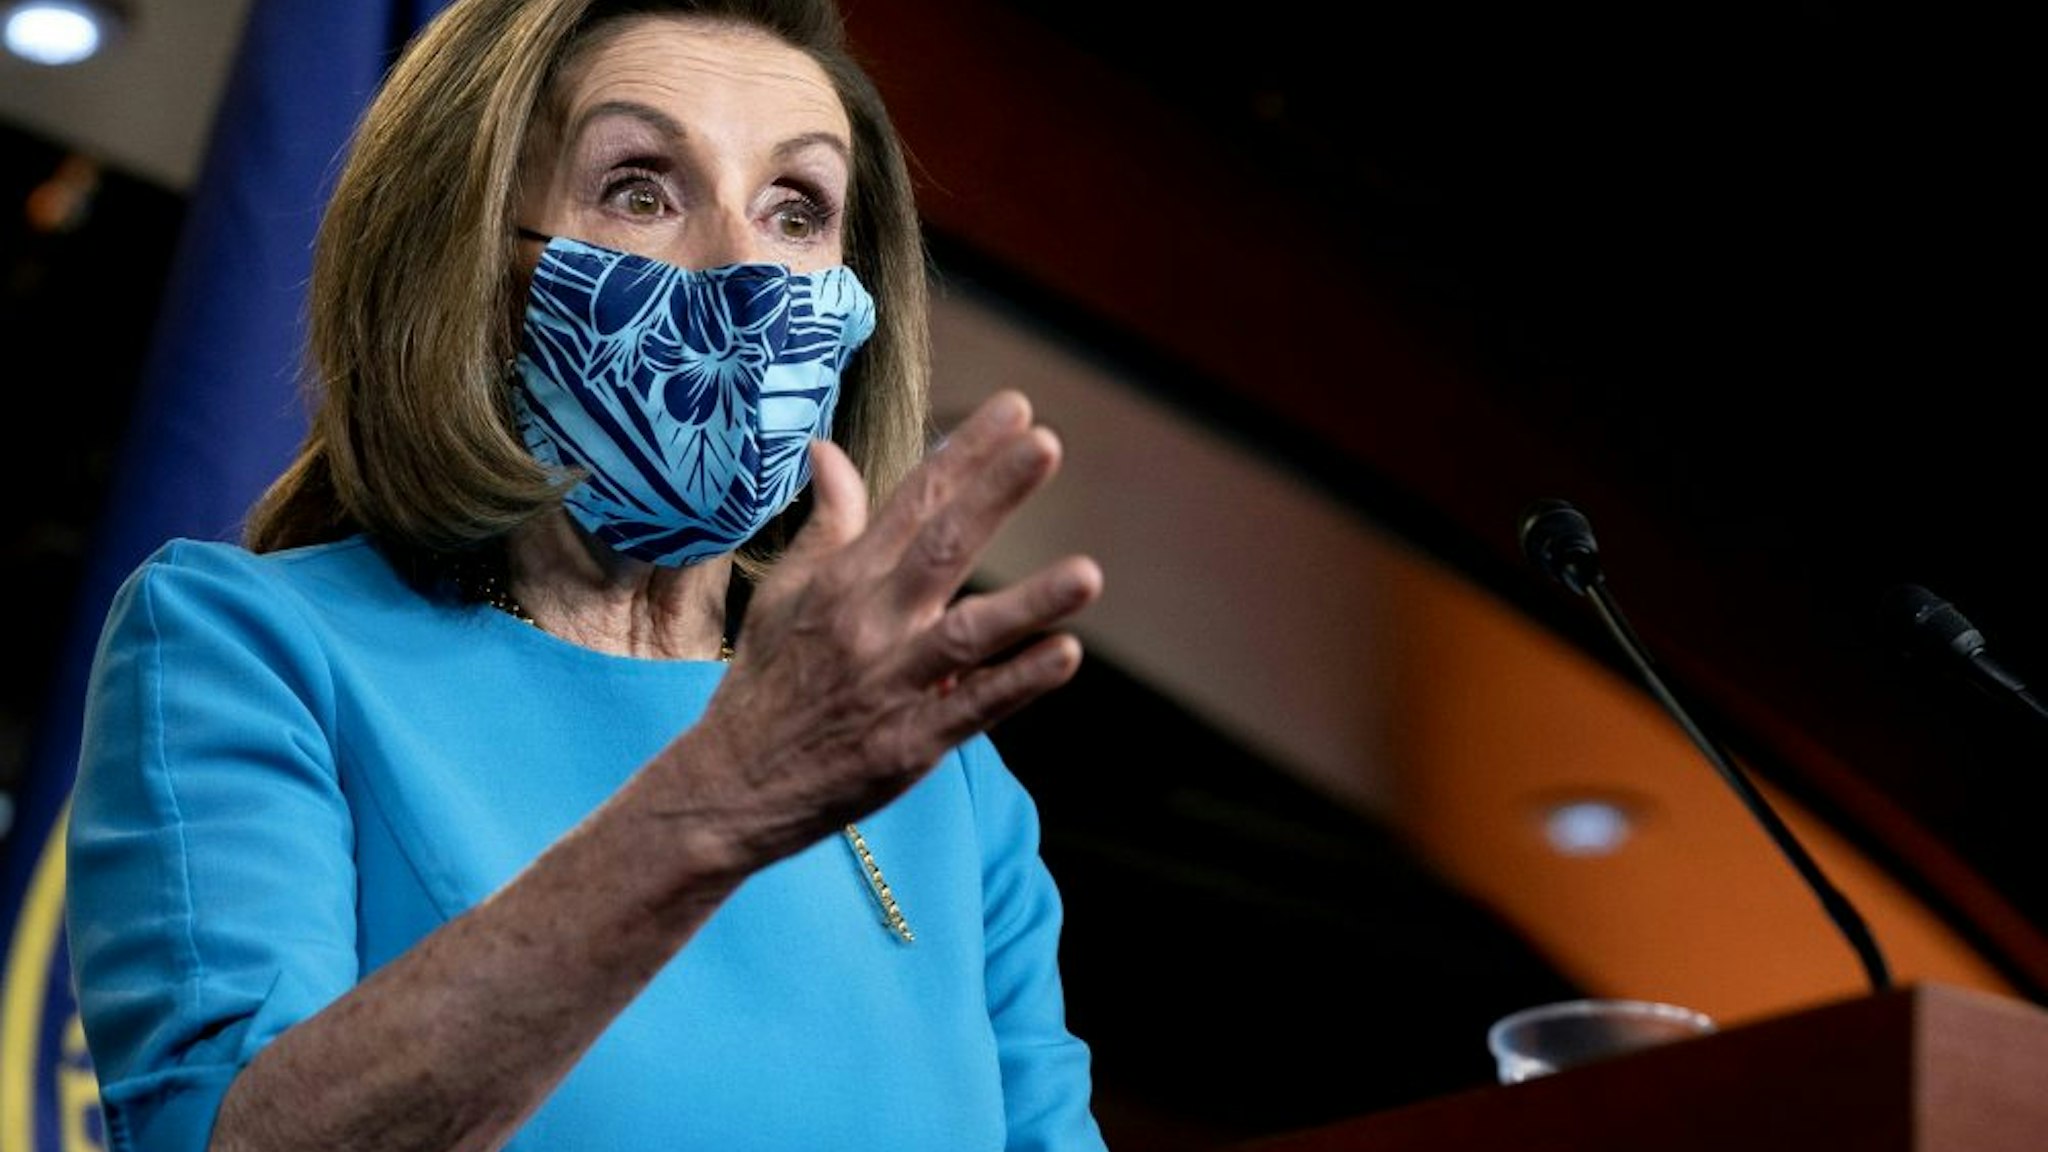 U.S. House Speaker Nancy Pelosi, a Democrat from California, wears a protective mask while speaking during a news conference at the U.S. Capitol in Washington, D.C., U.S., on Thursday, April 22, 2021. Congress is moving with increasing urgency on bipartisan legislation to confront China and bolster U.S. competitiveness in technology and critical manufacturing with the Senate poised to act within weeks on a package of bills.